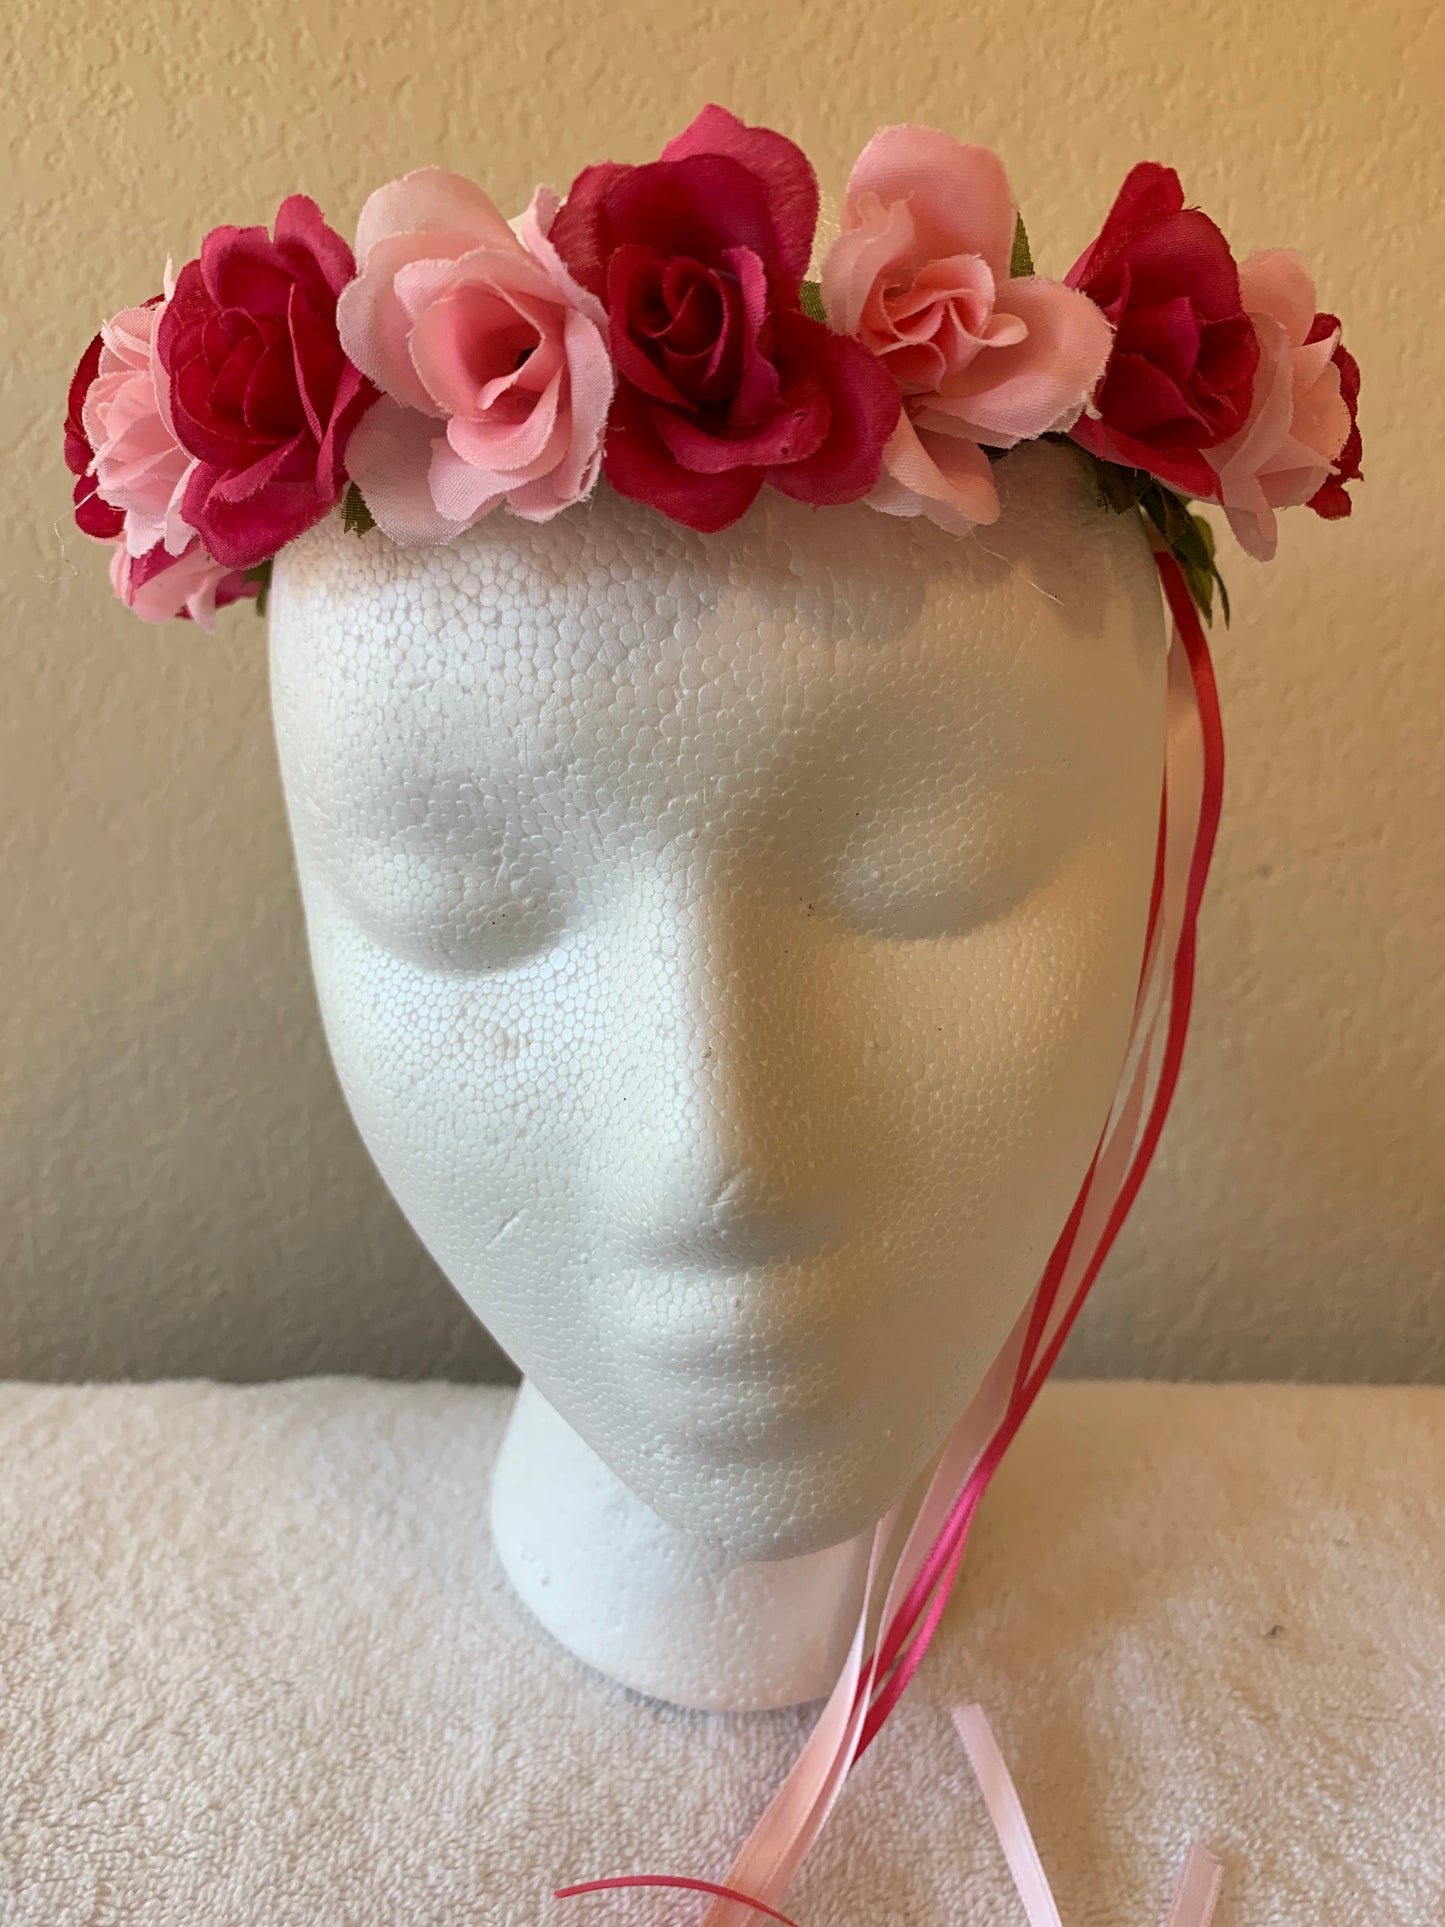 Extra Small Wreath - Hot Pink and Pale Pink Roses